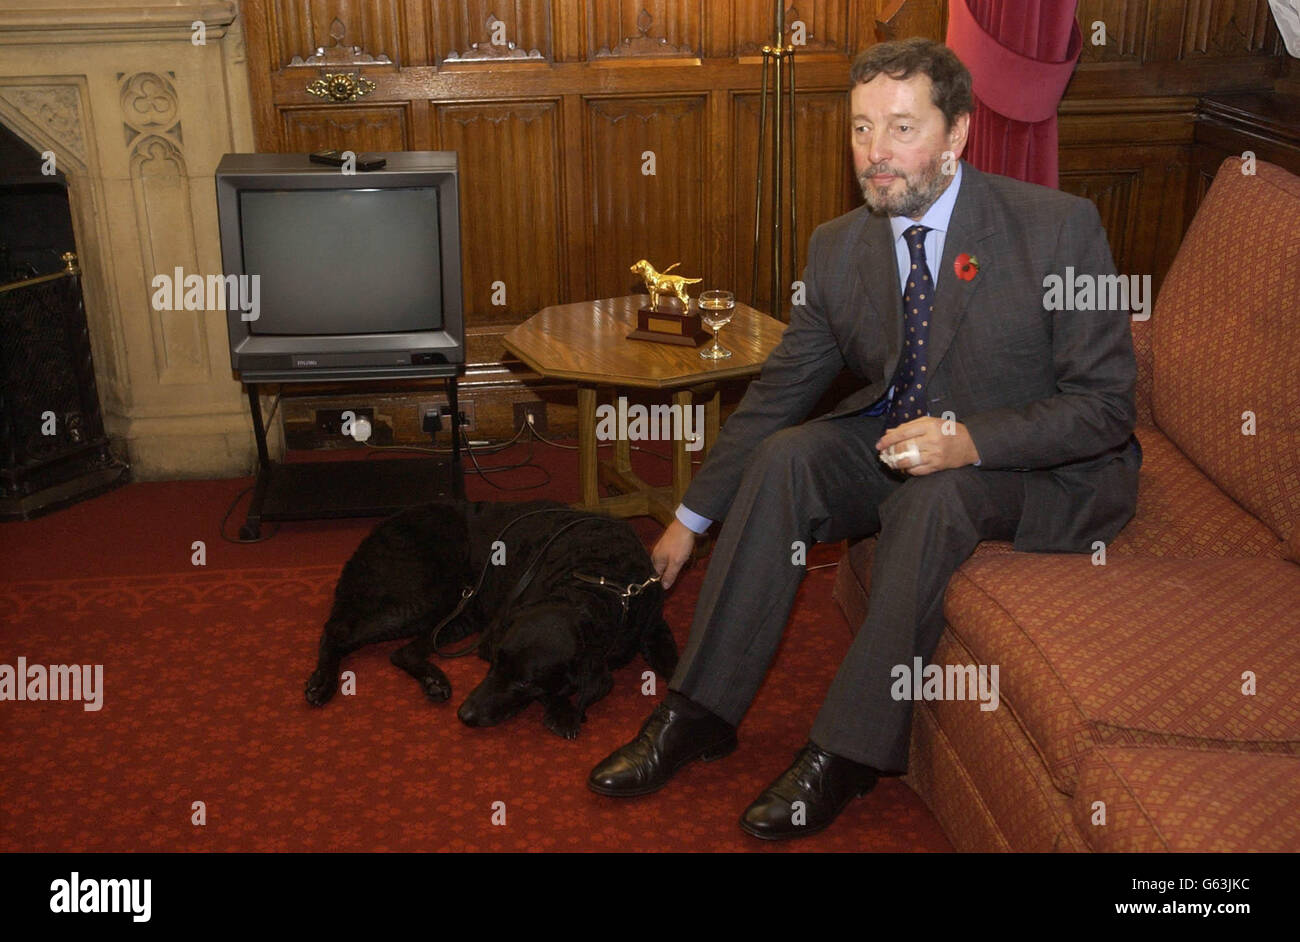 The Home Secretary David Blunkett relaxes in his office in the House of Commons, London prior to the visit of the new Assistant for Homeland Security Advisor for the United States, Governor Tom Ridge. Tom Ridge was shedding light on the US s internal security strategy. Stock Photo